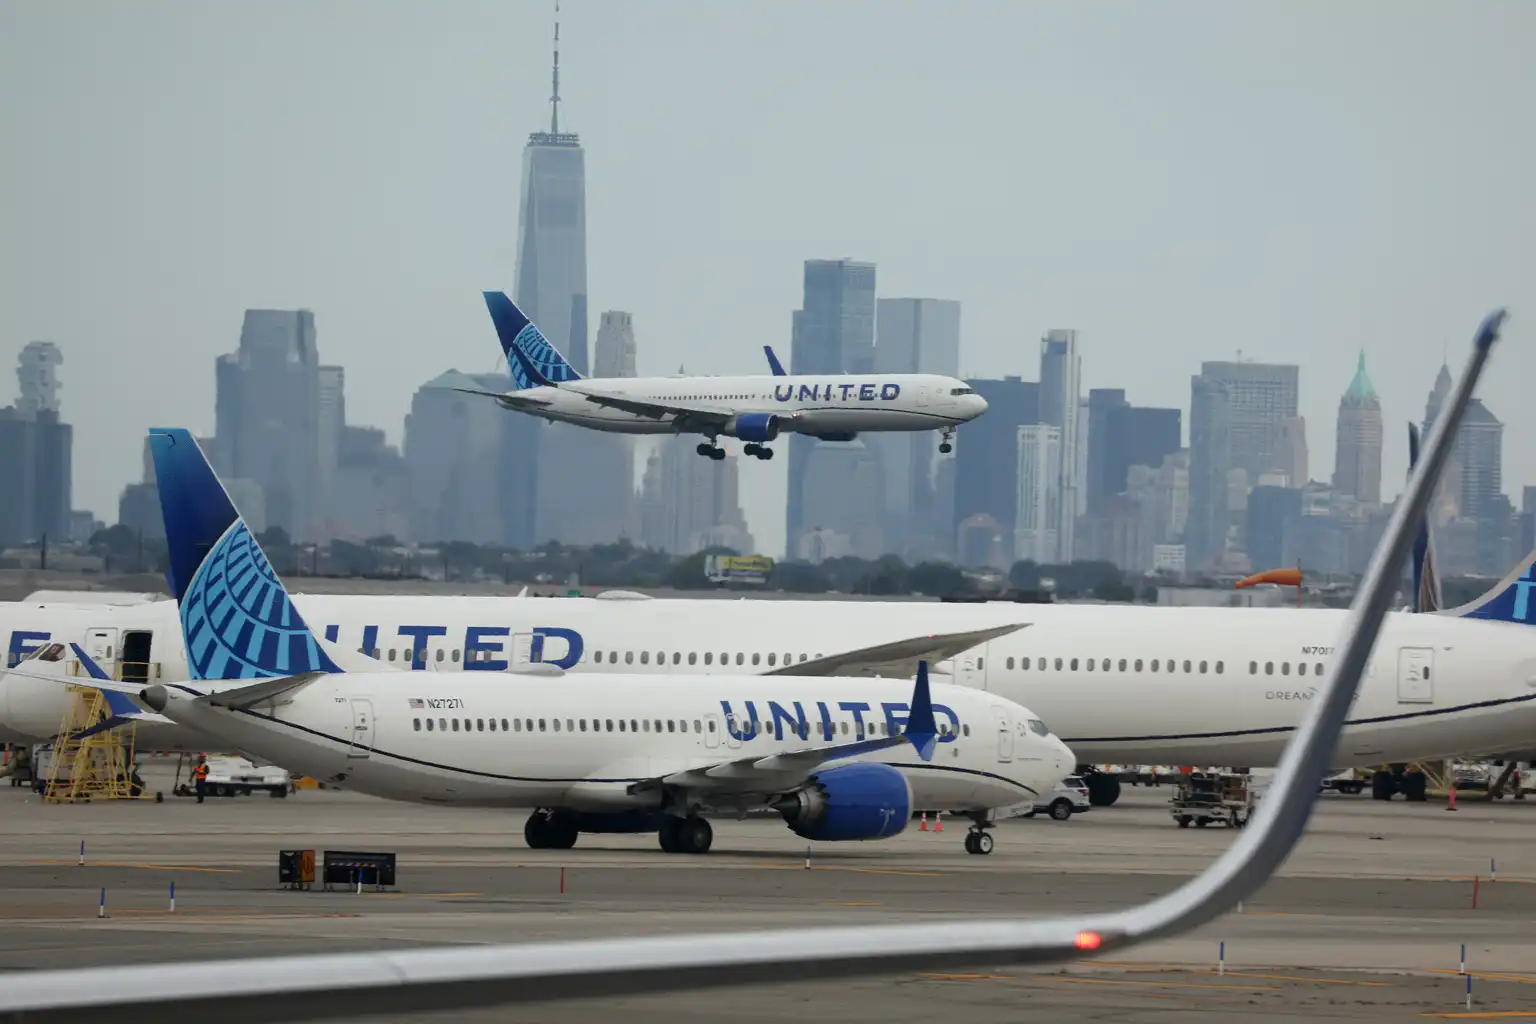 Flight Safety in the Spotlight: How United Airlines is Navigating Through FAA's Close Watch and What's Next for Their Big Dream of Flying High